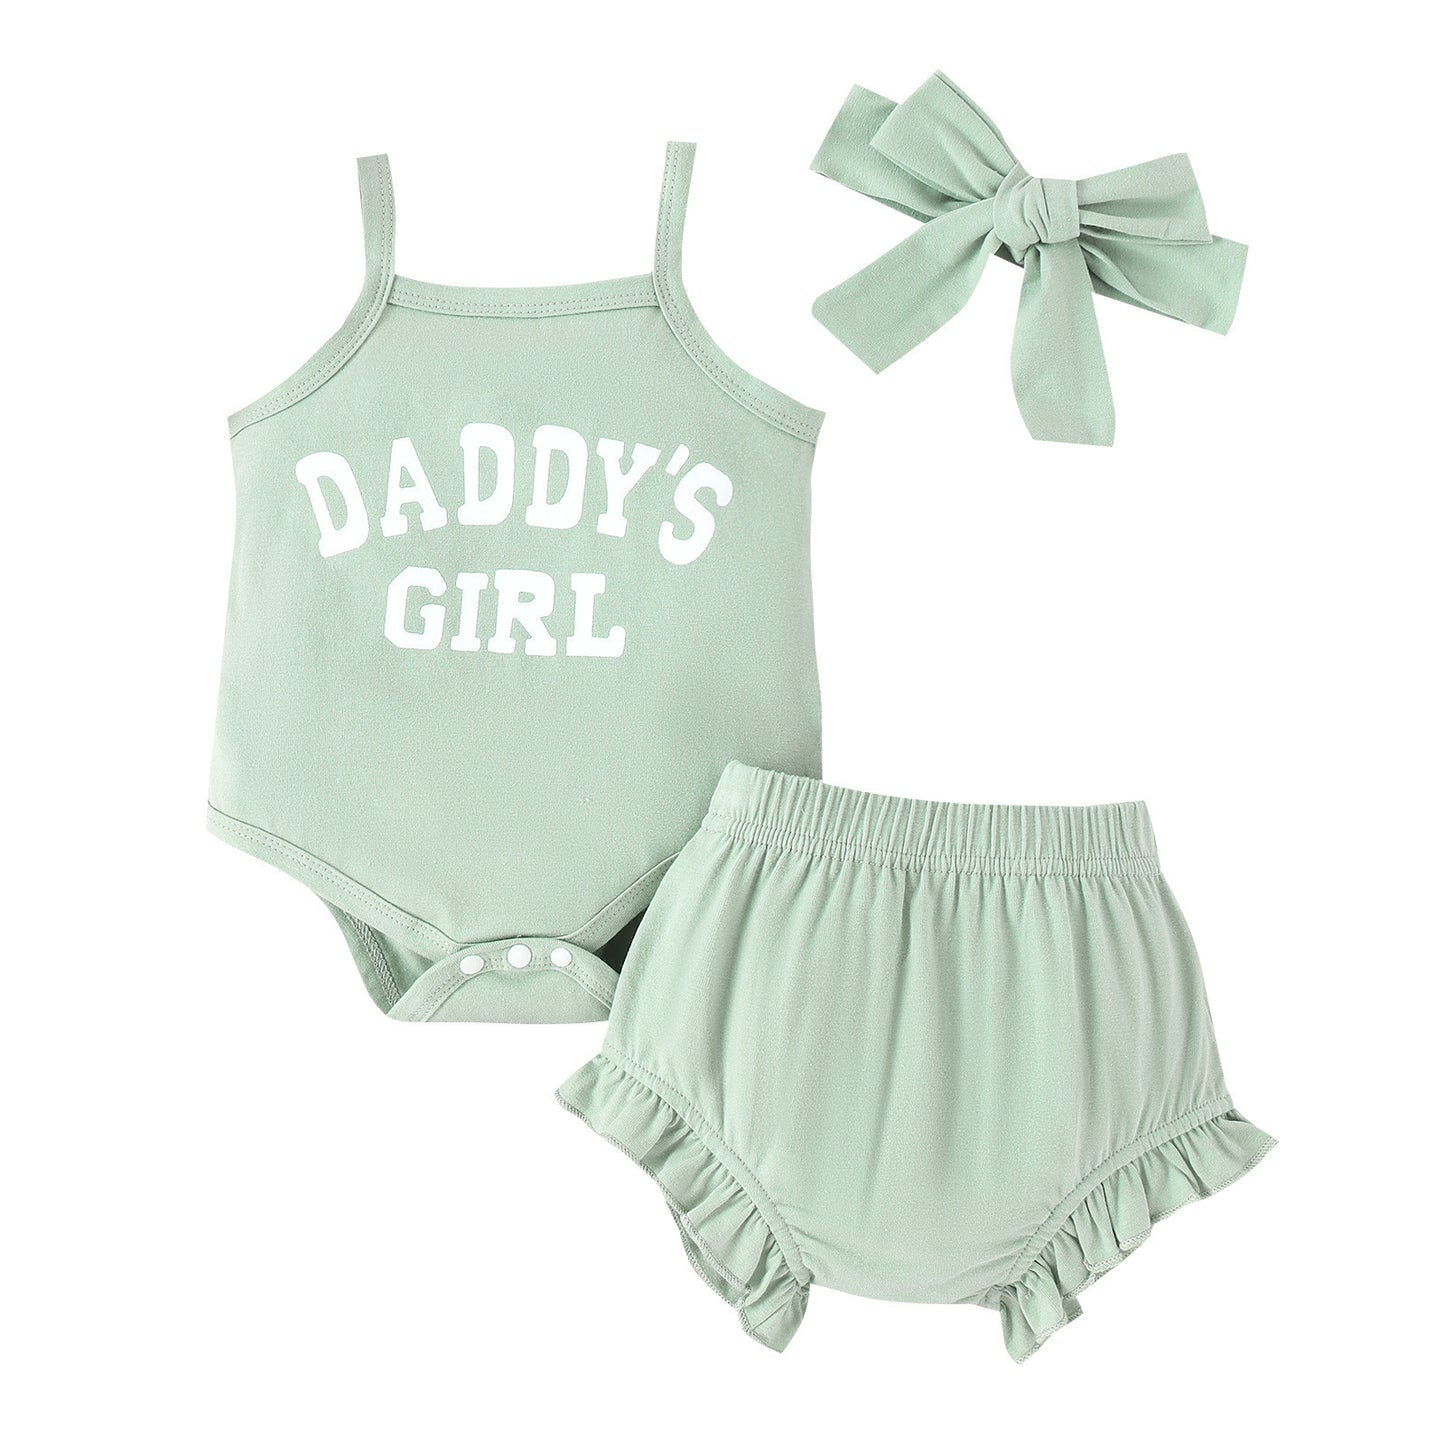 Girls' Letter Camisole Shorts Suit Summer